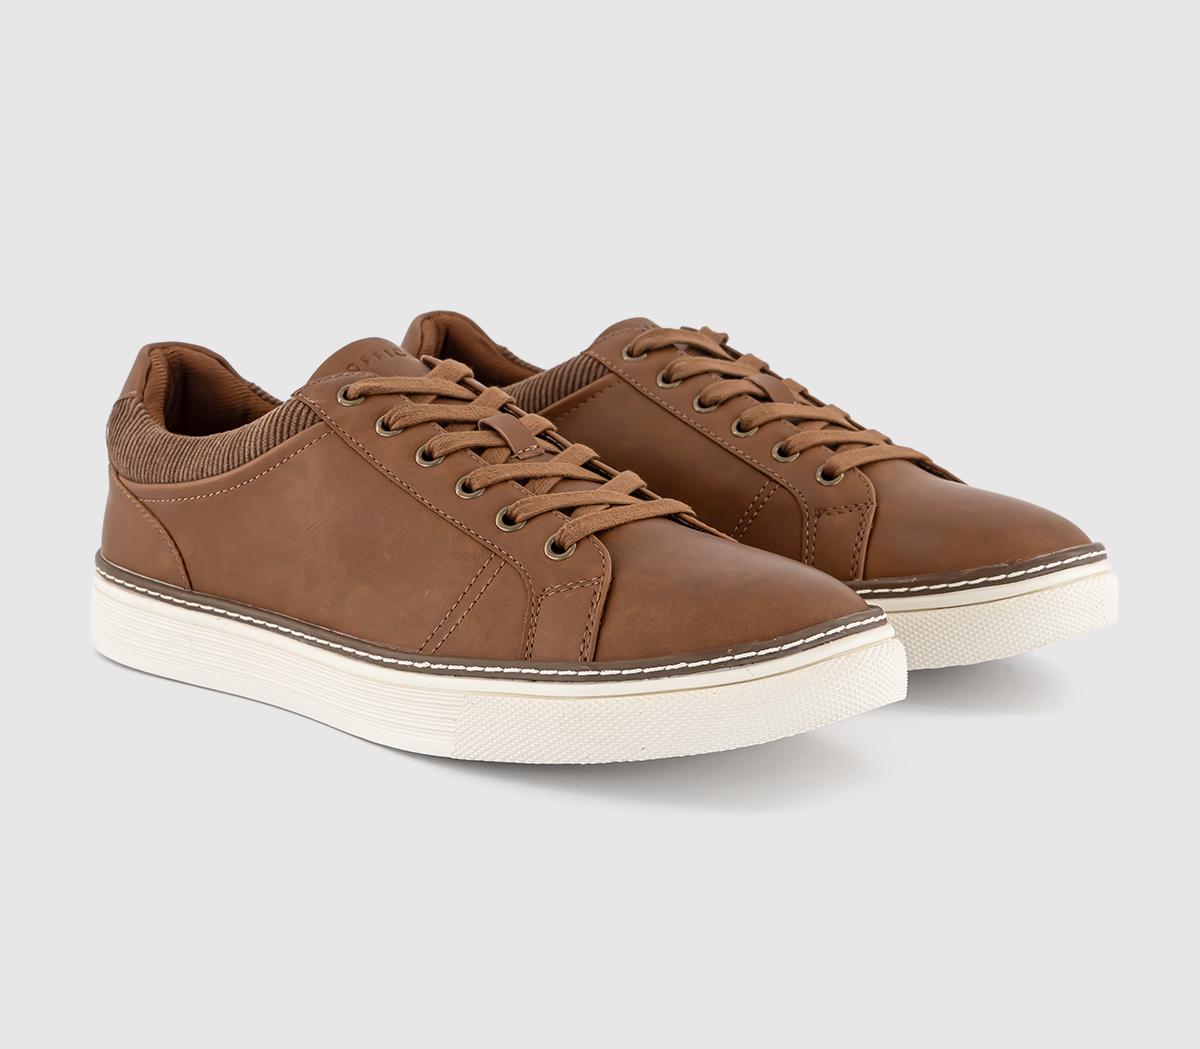 OFFICE Mens Chatsworth Cord Collar Trainers Tan, 8